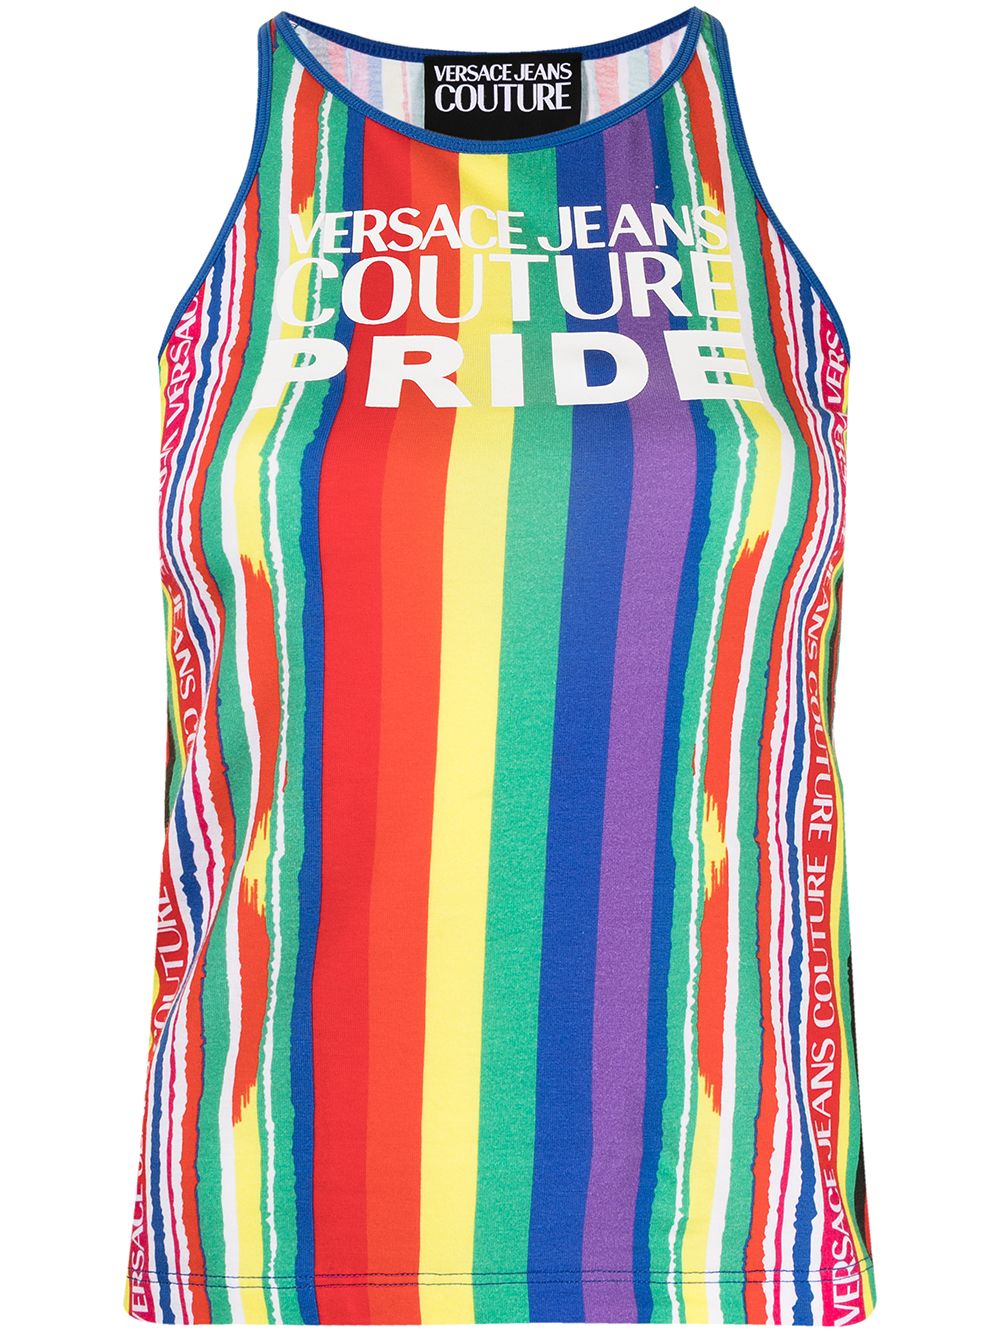 Versace Jeans Couture Pride Project Top - Mehrfarbig von Versace Jeans Couture